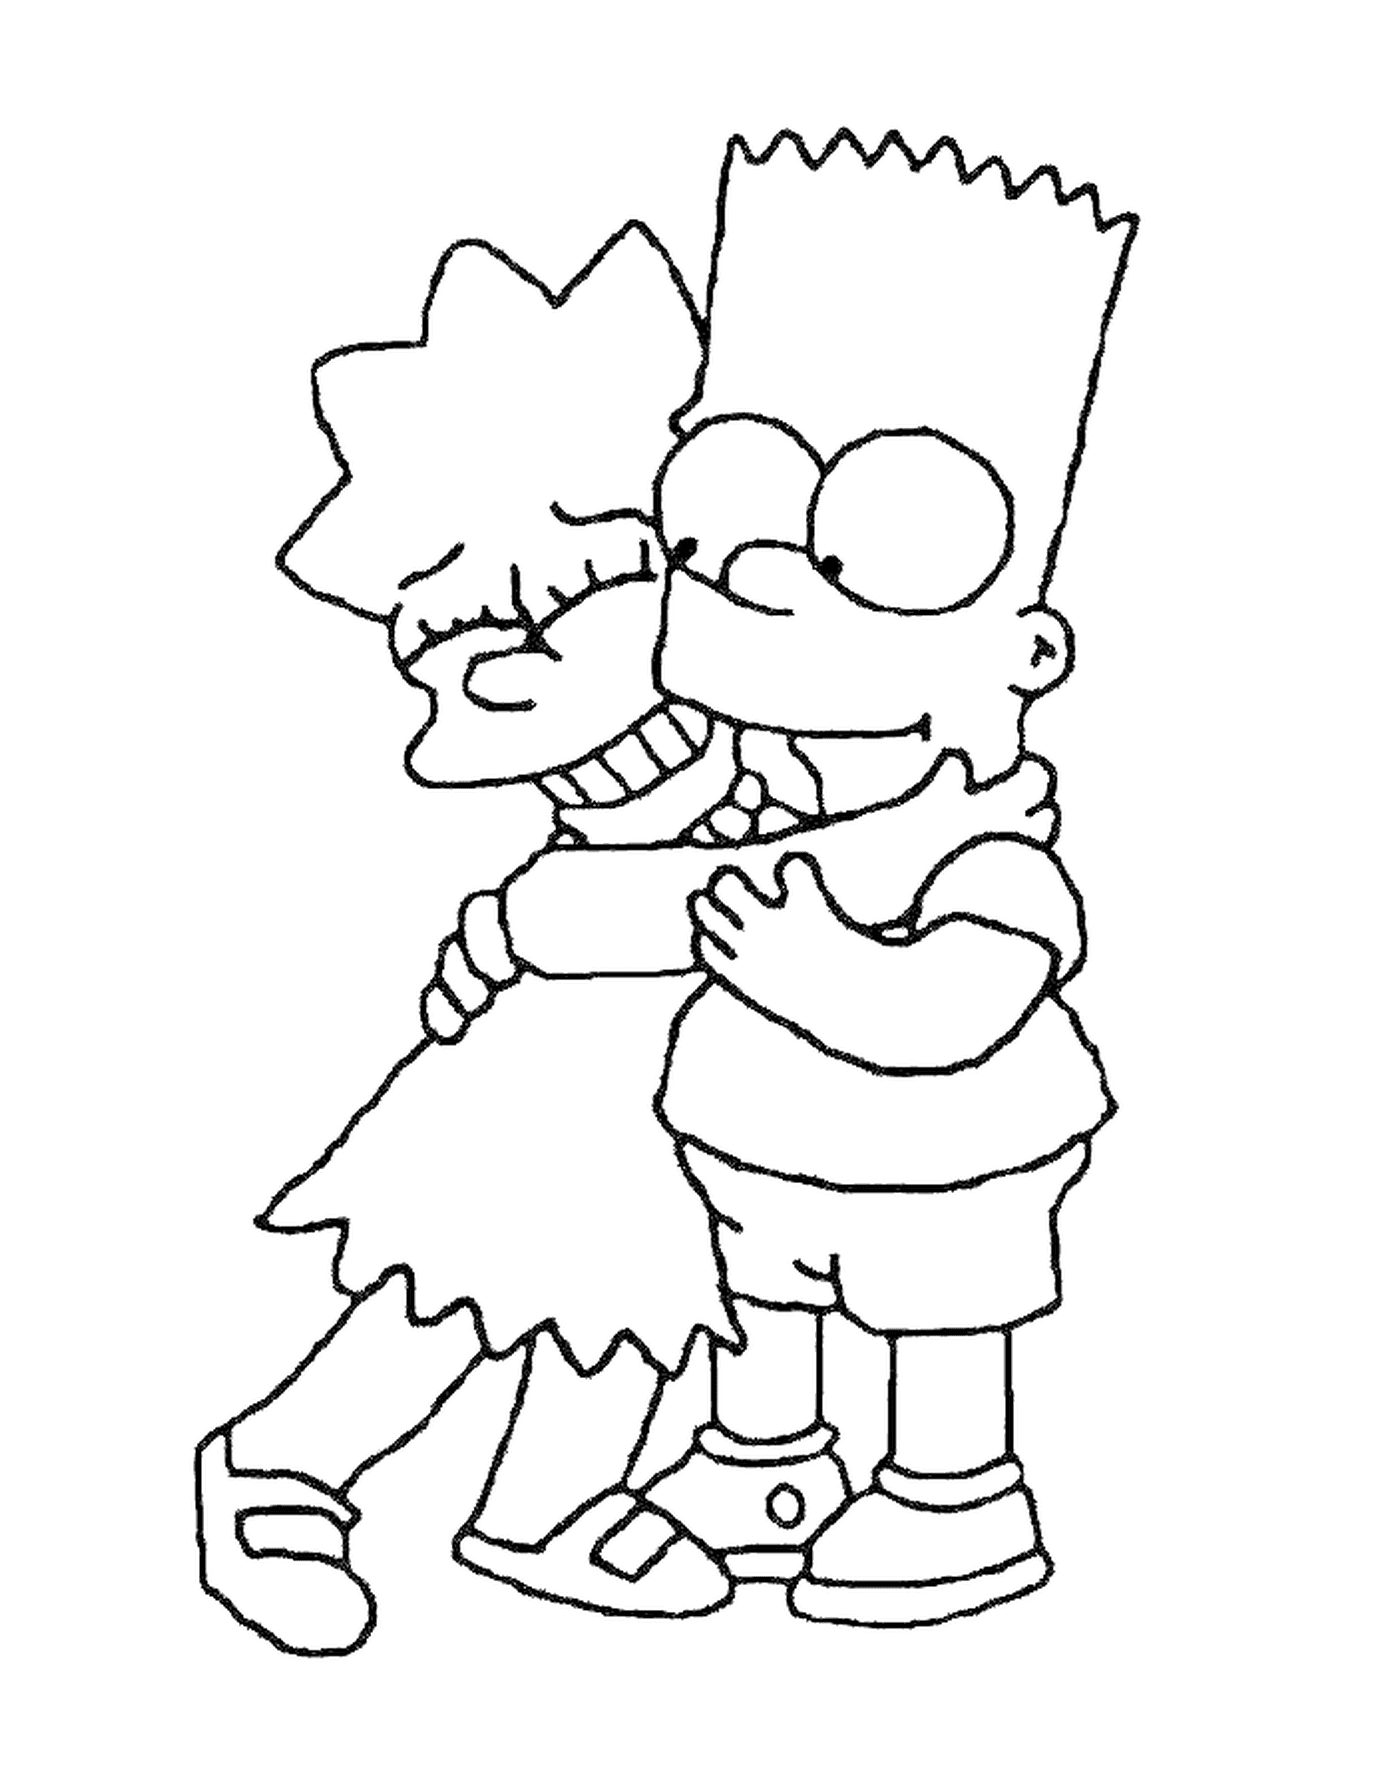  Bart and Lisa hug, boy holding a girl in her arms 